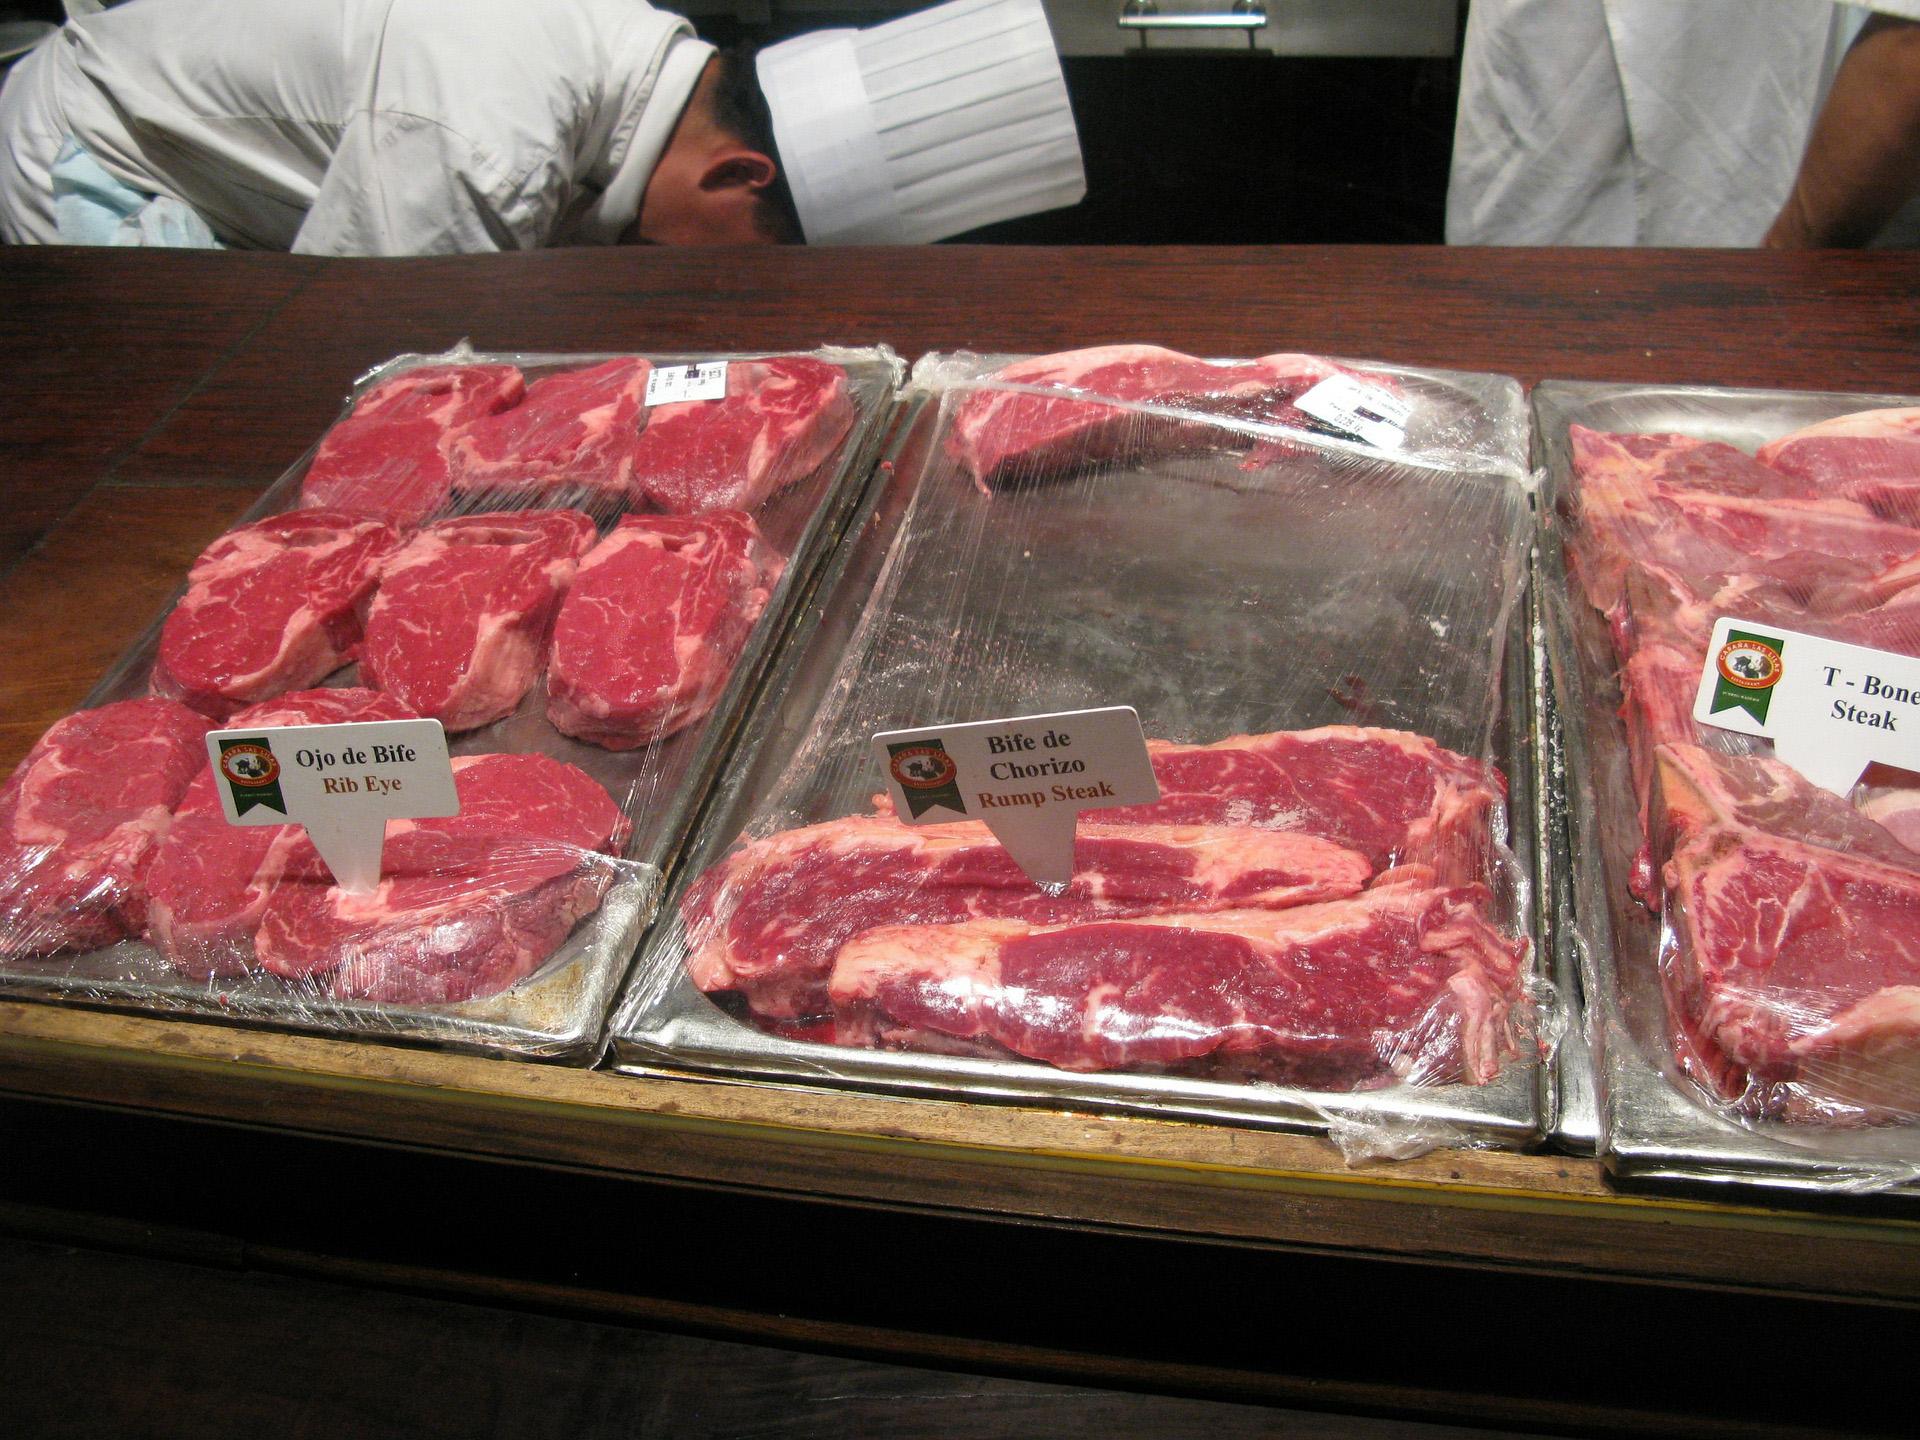 Tray of meat in commercial kitchen